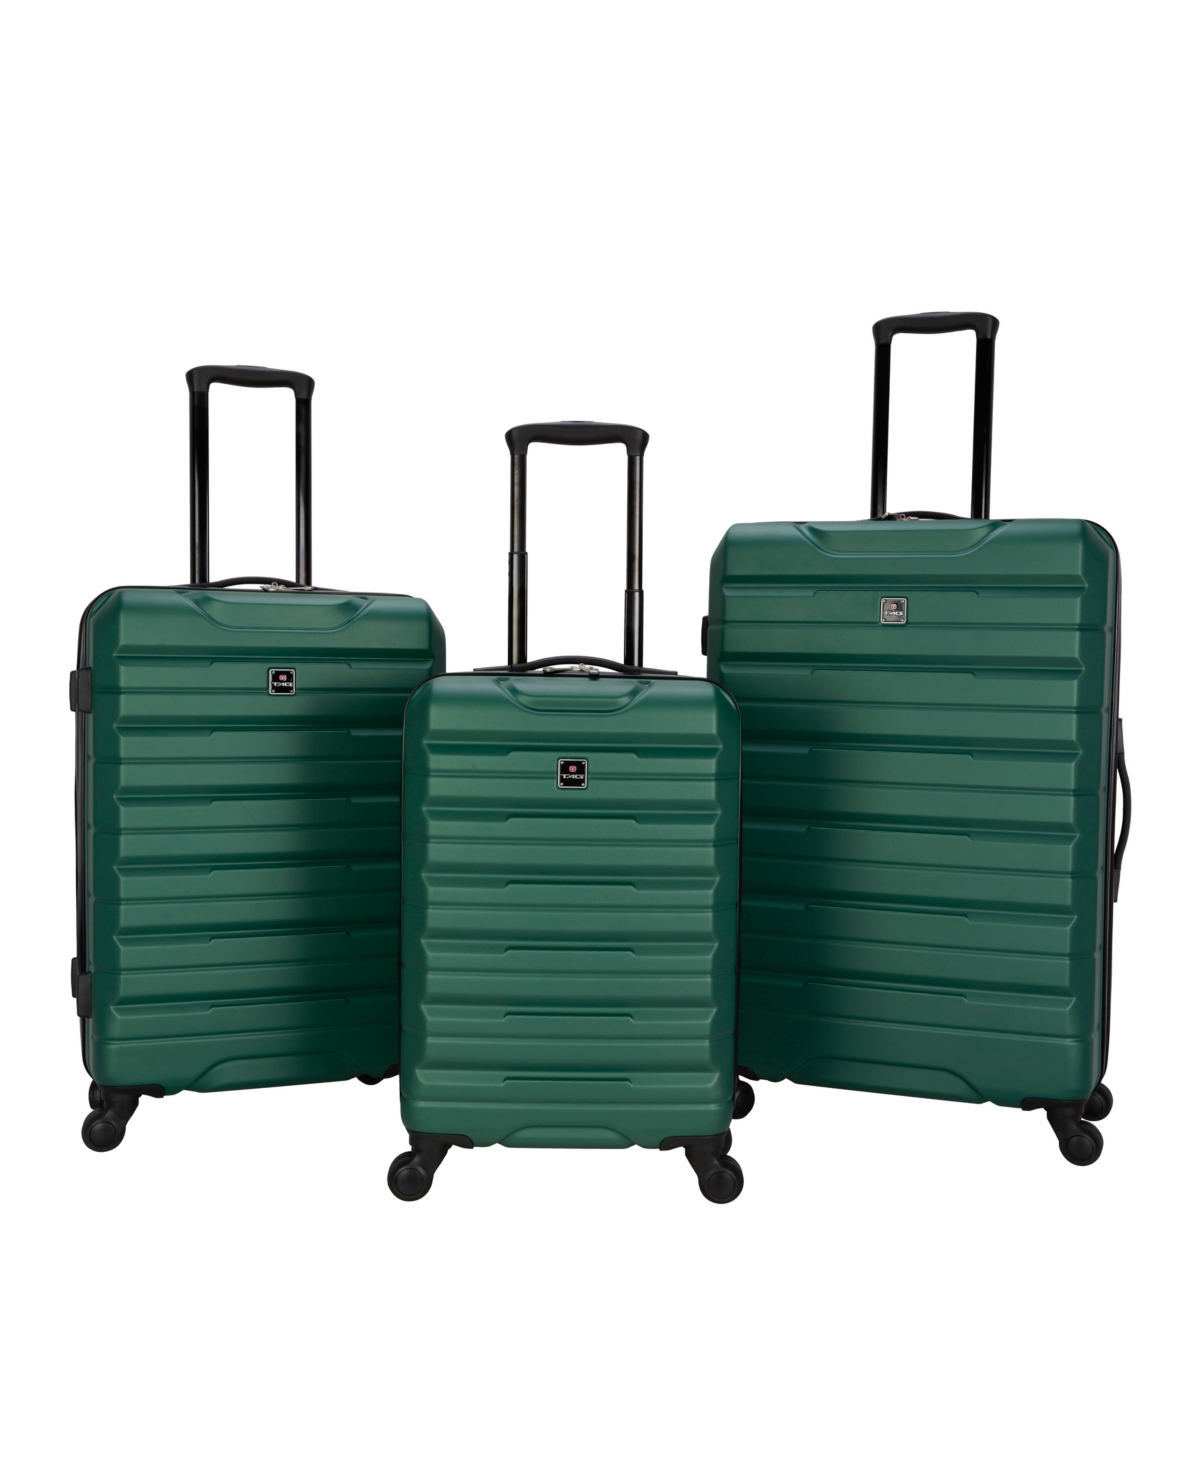 Tag Gateway 3 Piece Hardside Luggage Set In Forest